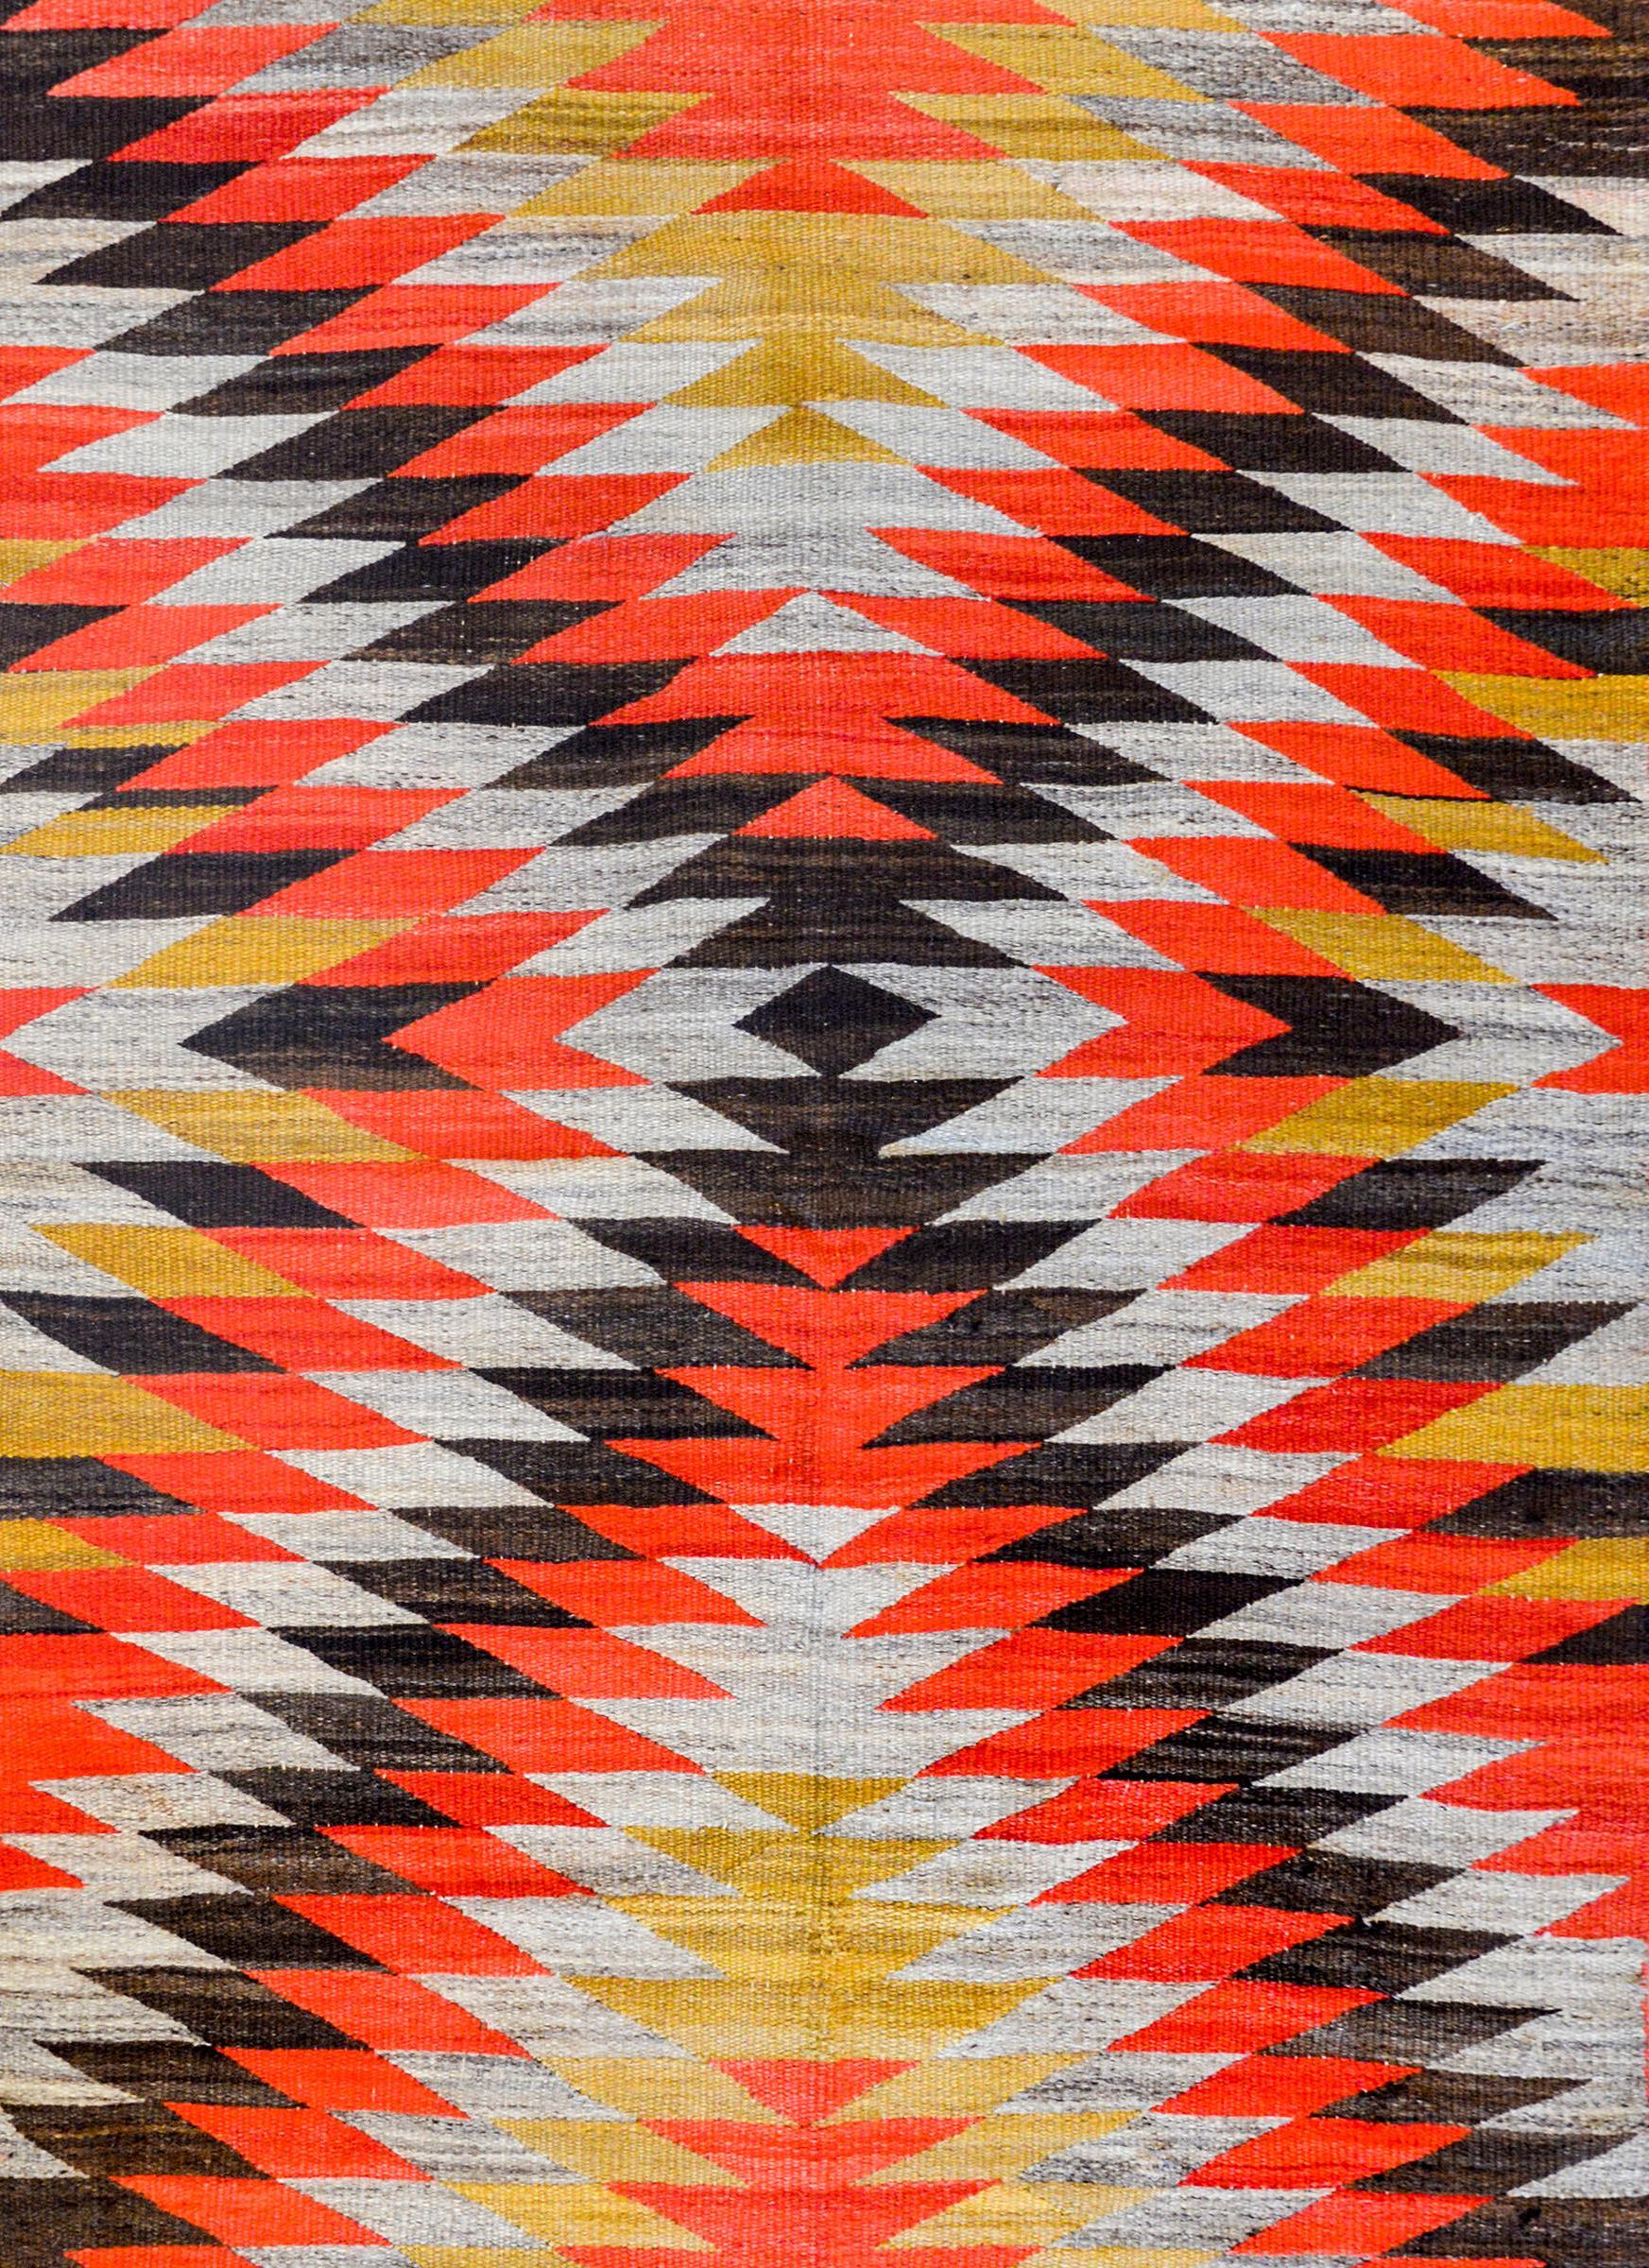 A striking early 20th century native North American Navajo rug with a fabulous pattern containing myriad triangles creating a larger triangle pattern, all woven in crimson and gold vegetable dyed wool, with black and grey undyed wool.